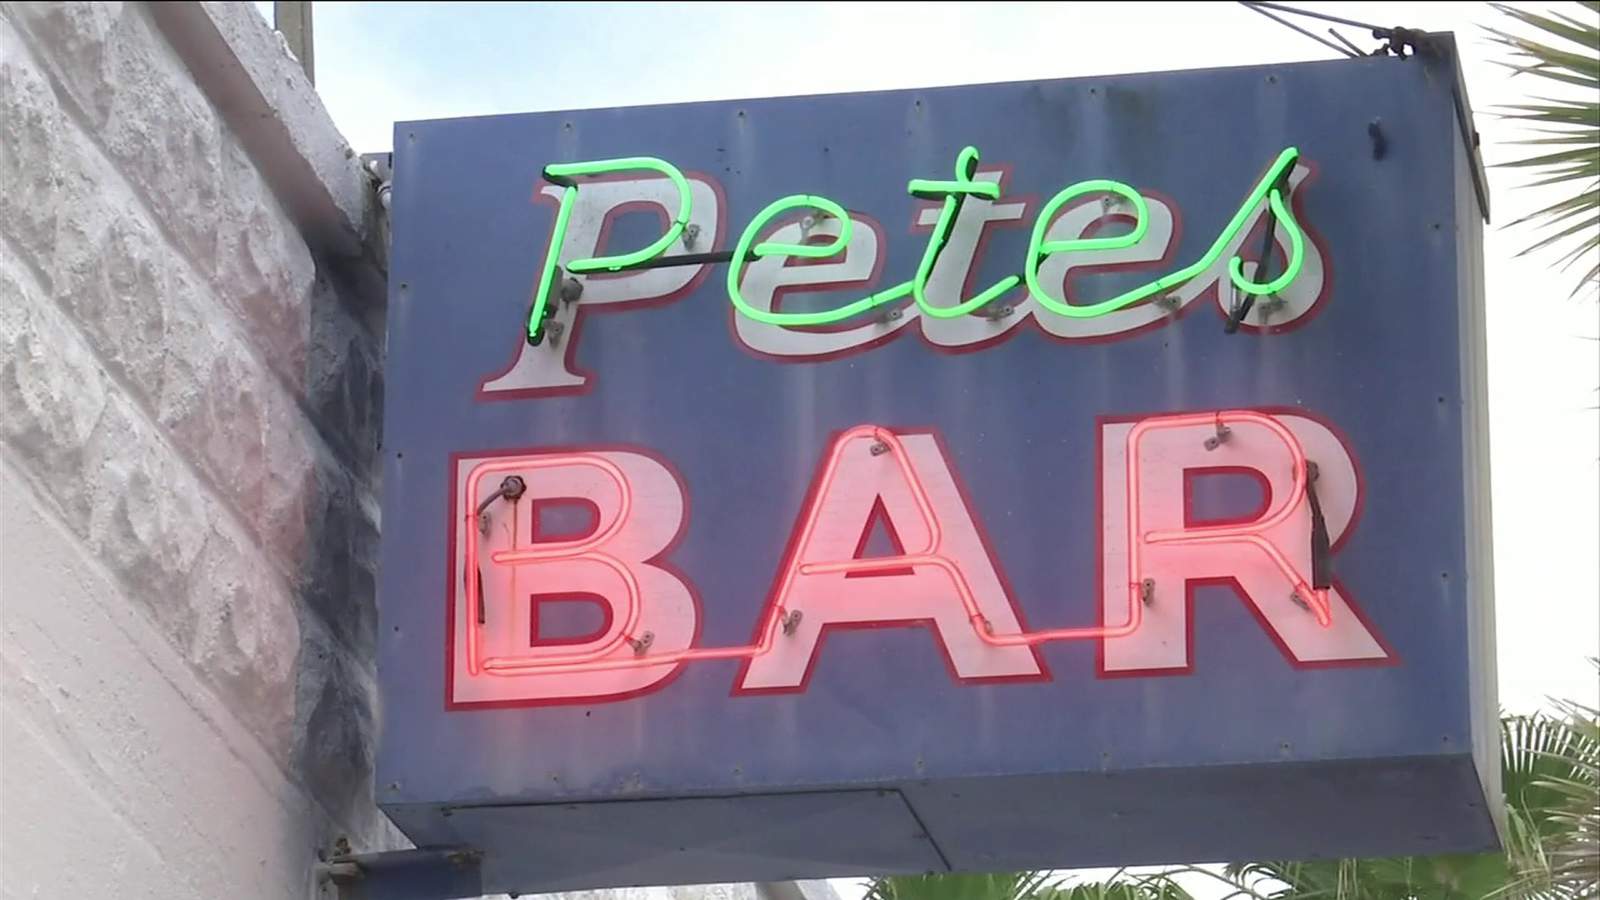 Petes Bar owners make plea to Florida governor: Let us open now